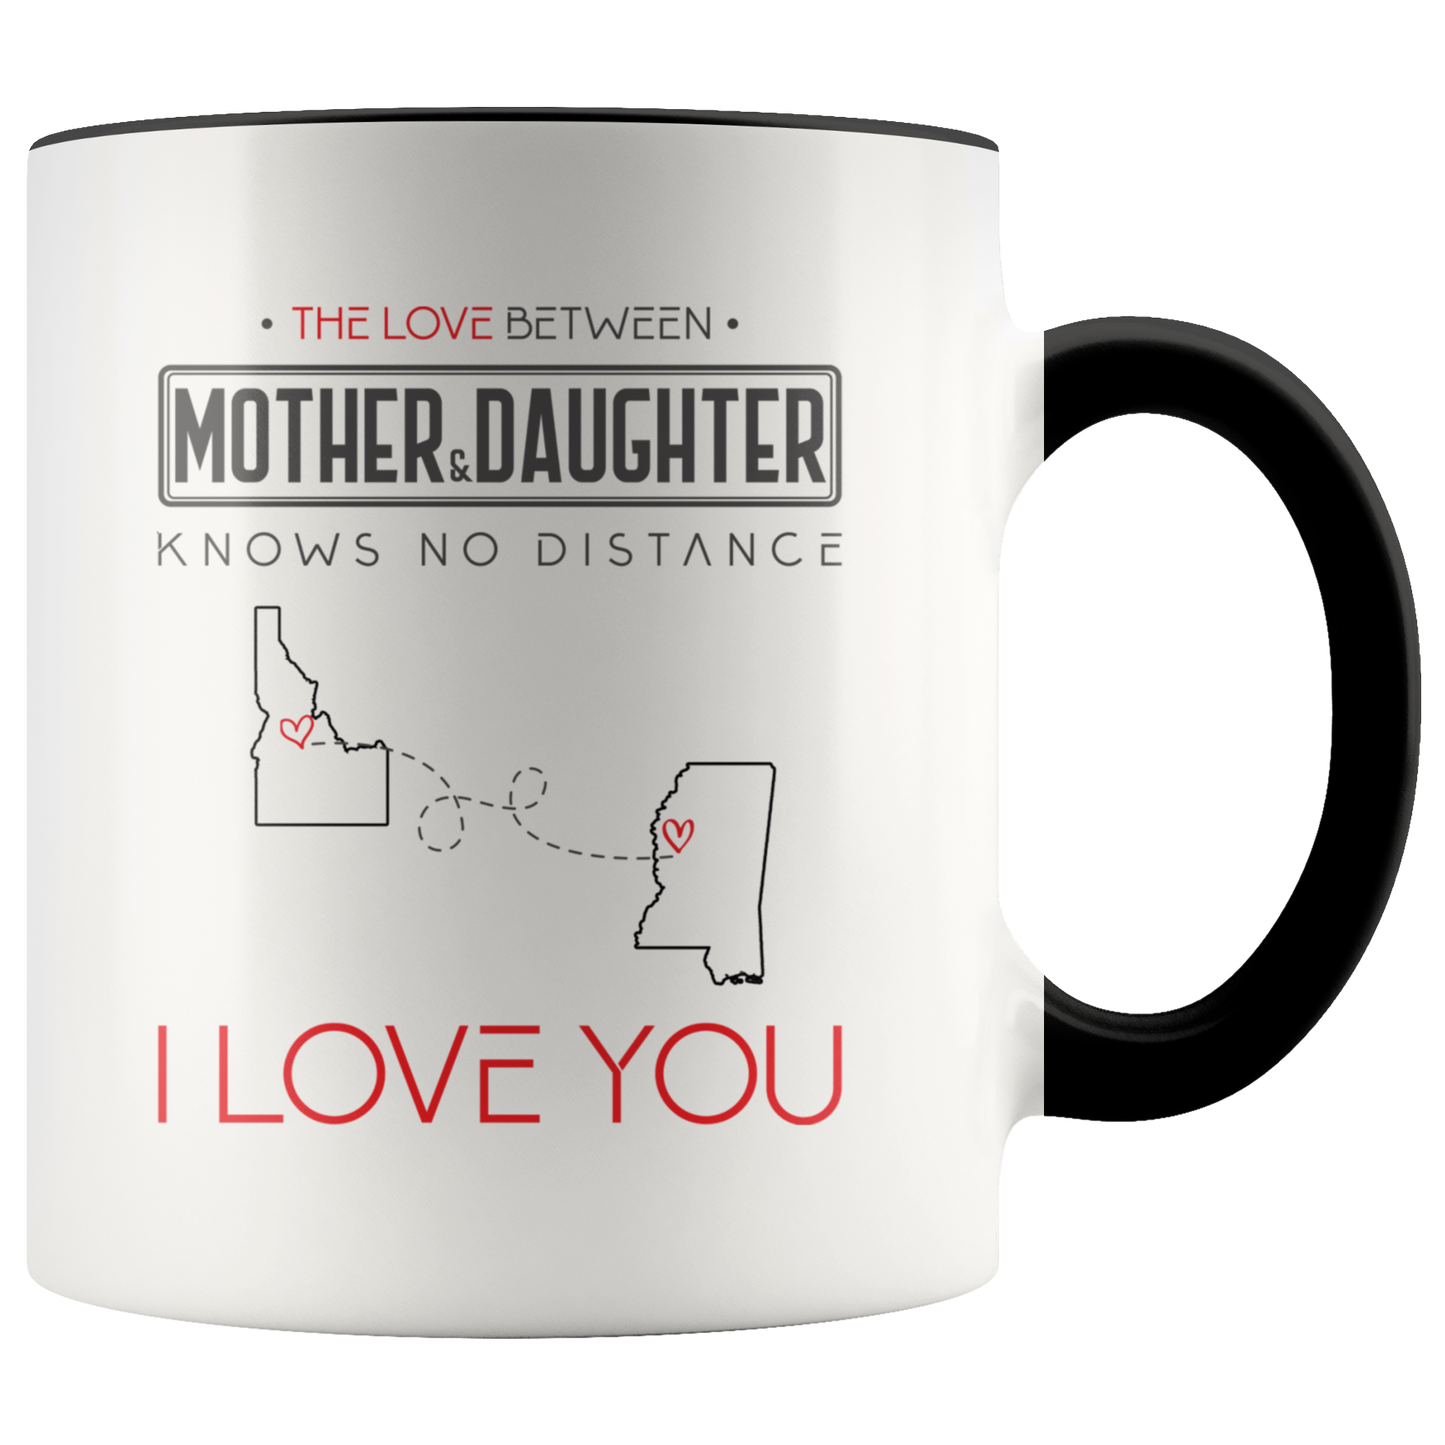 ND-21314960-sp-24135 - [ Idaho | Mississippi ]Mom And Daughter Accent Mug 11 oz Red - The Love Between Mot